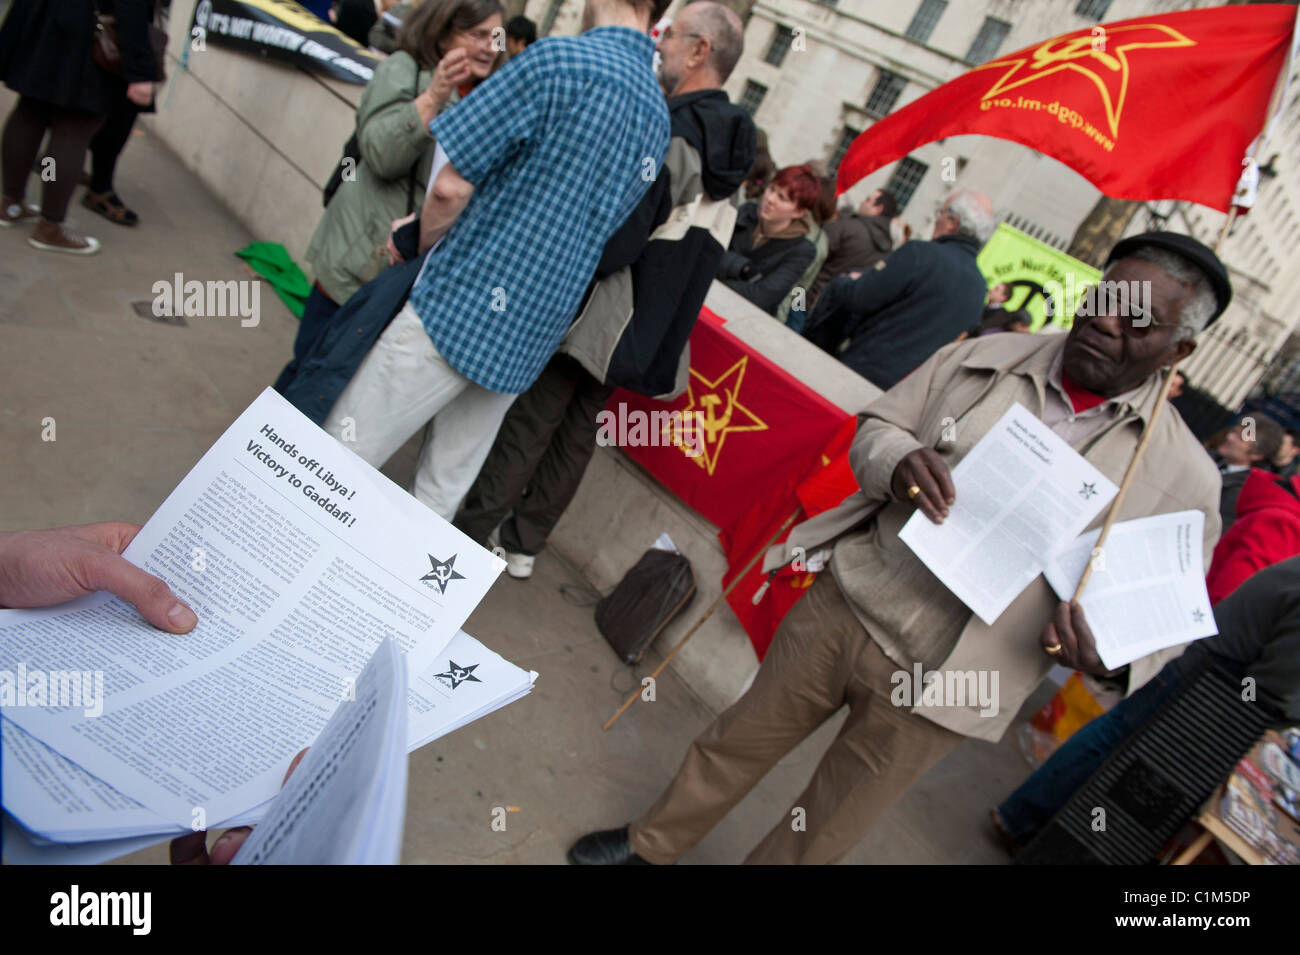 Members of the Communist Party of Great Britain stage a peace protest in support of Colonel Gaddafi in Libya Stock Photo